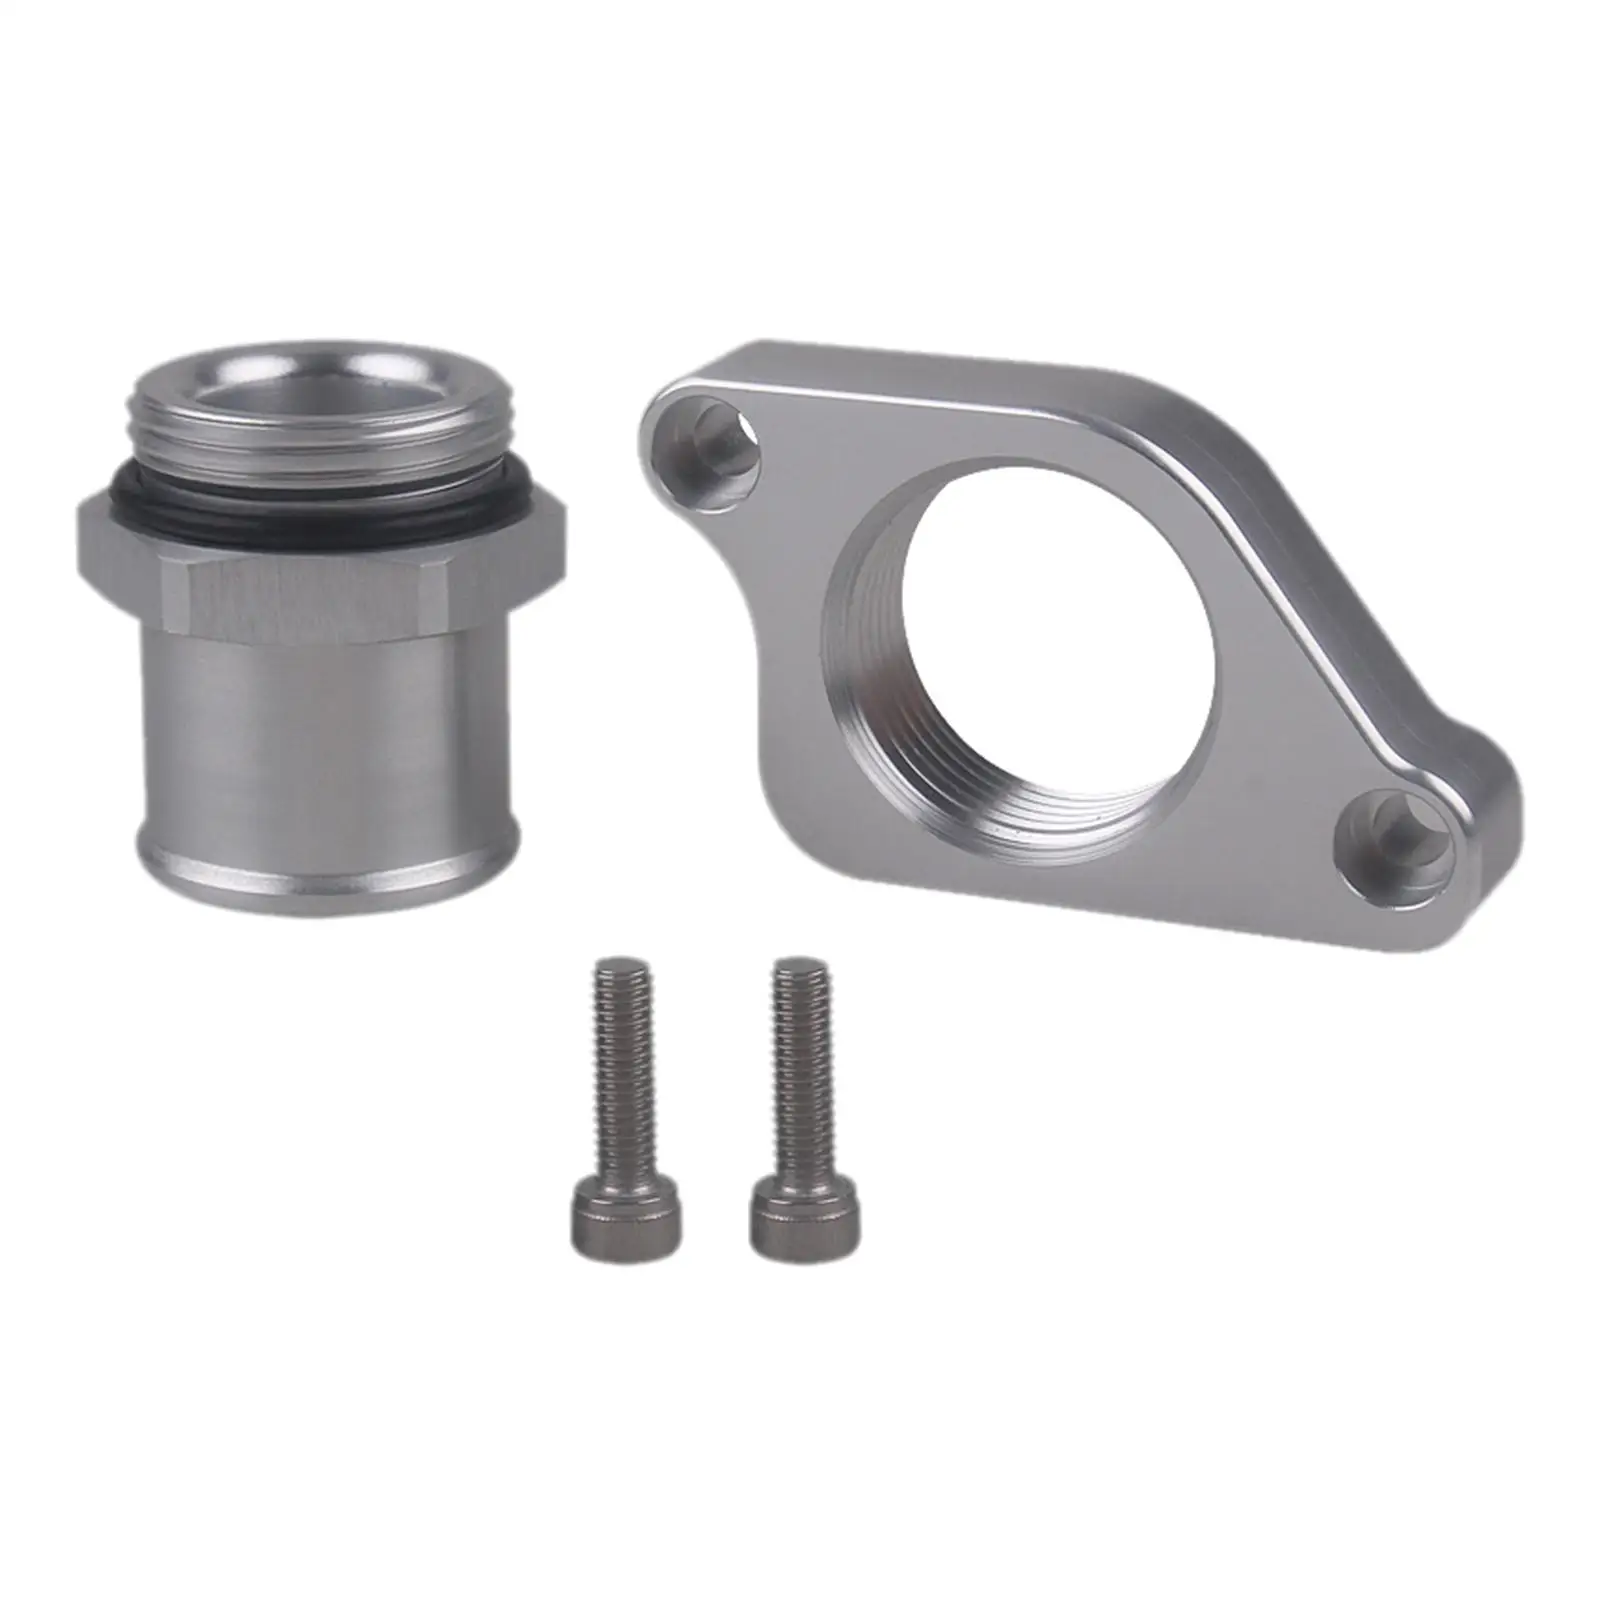 Durable Alloy Vehicles Coolant Housing Water Neck Straight Through & Screws